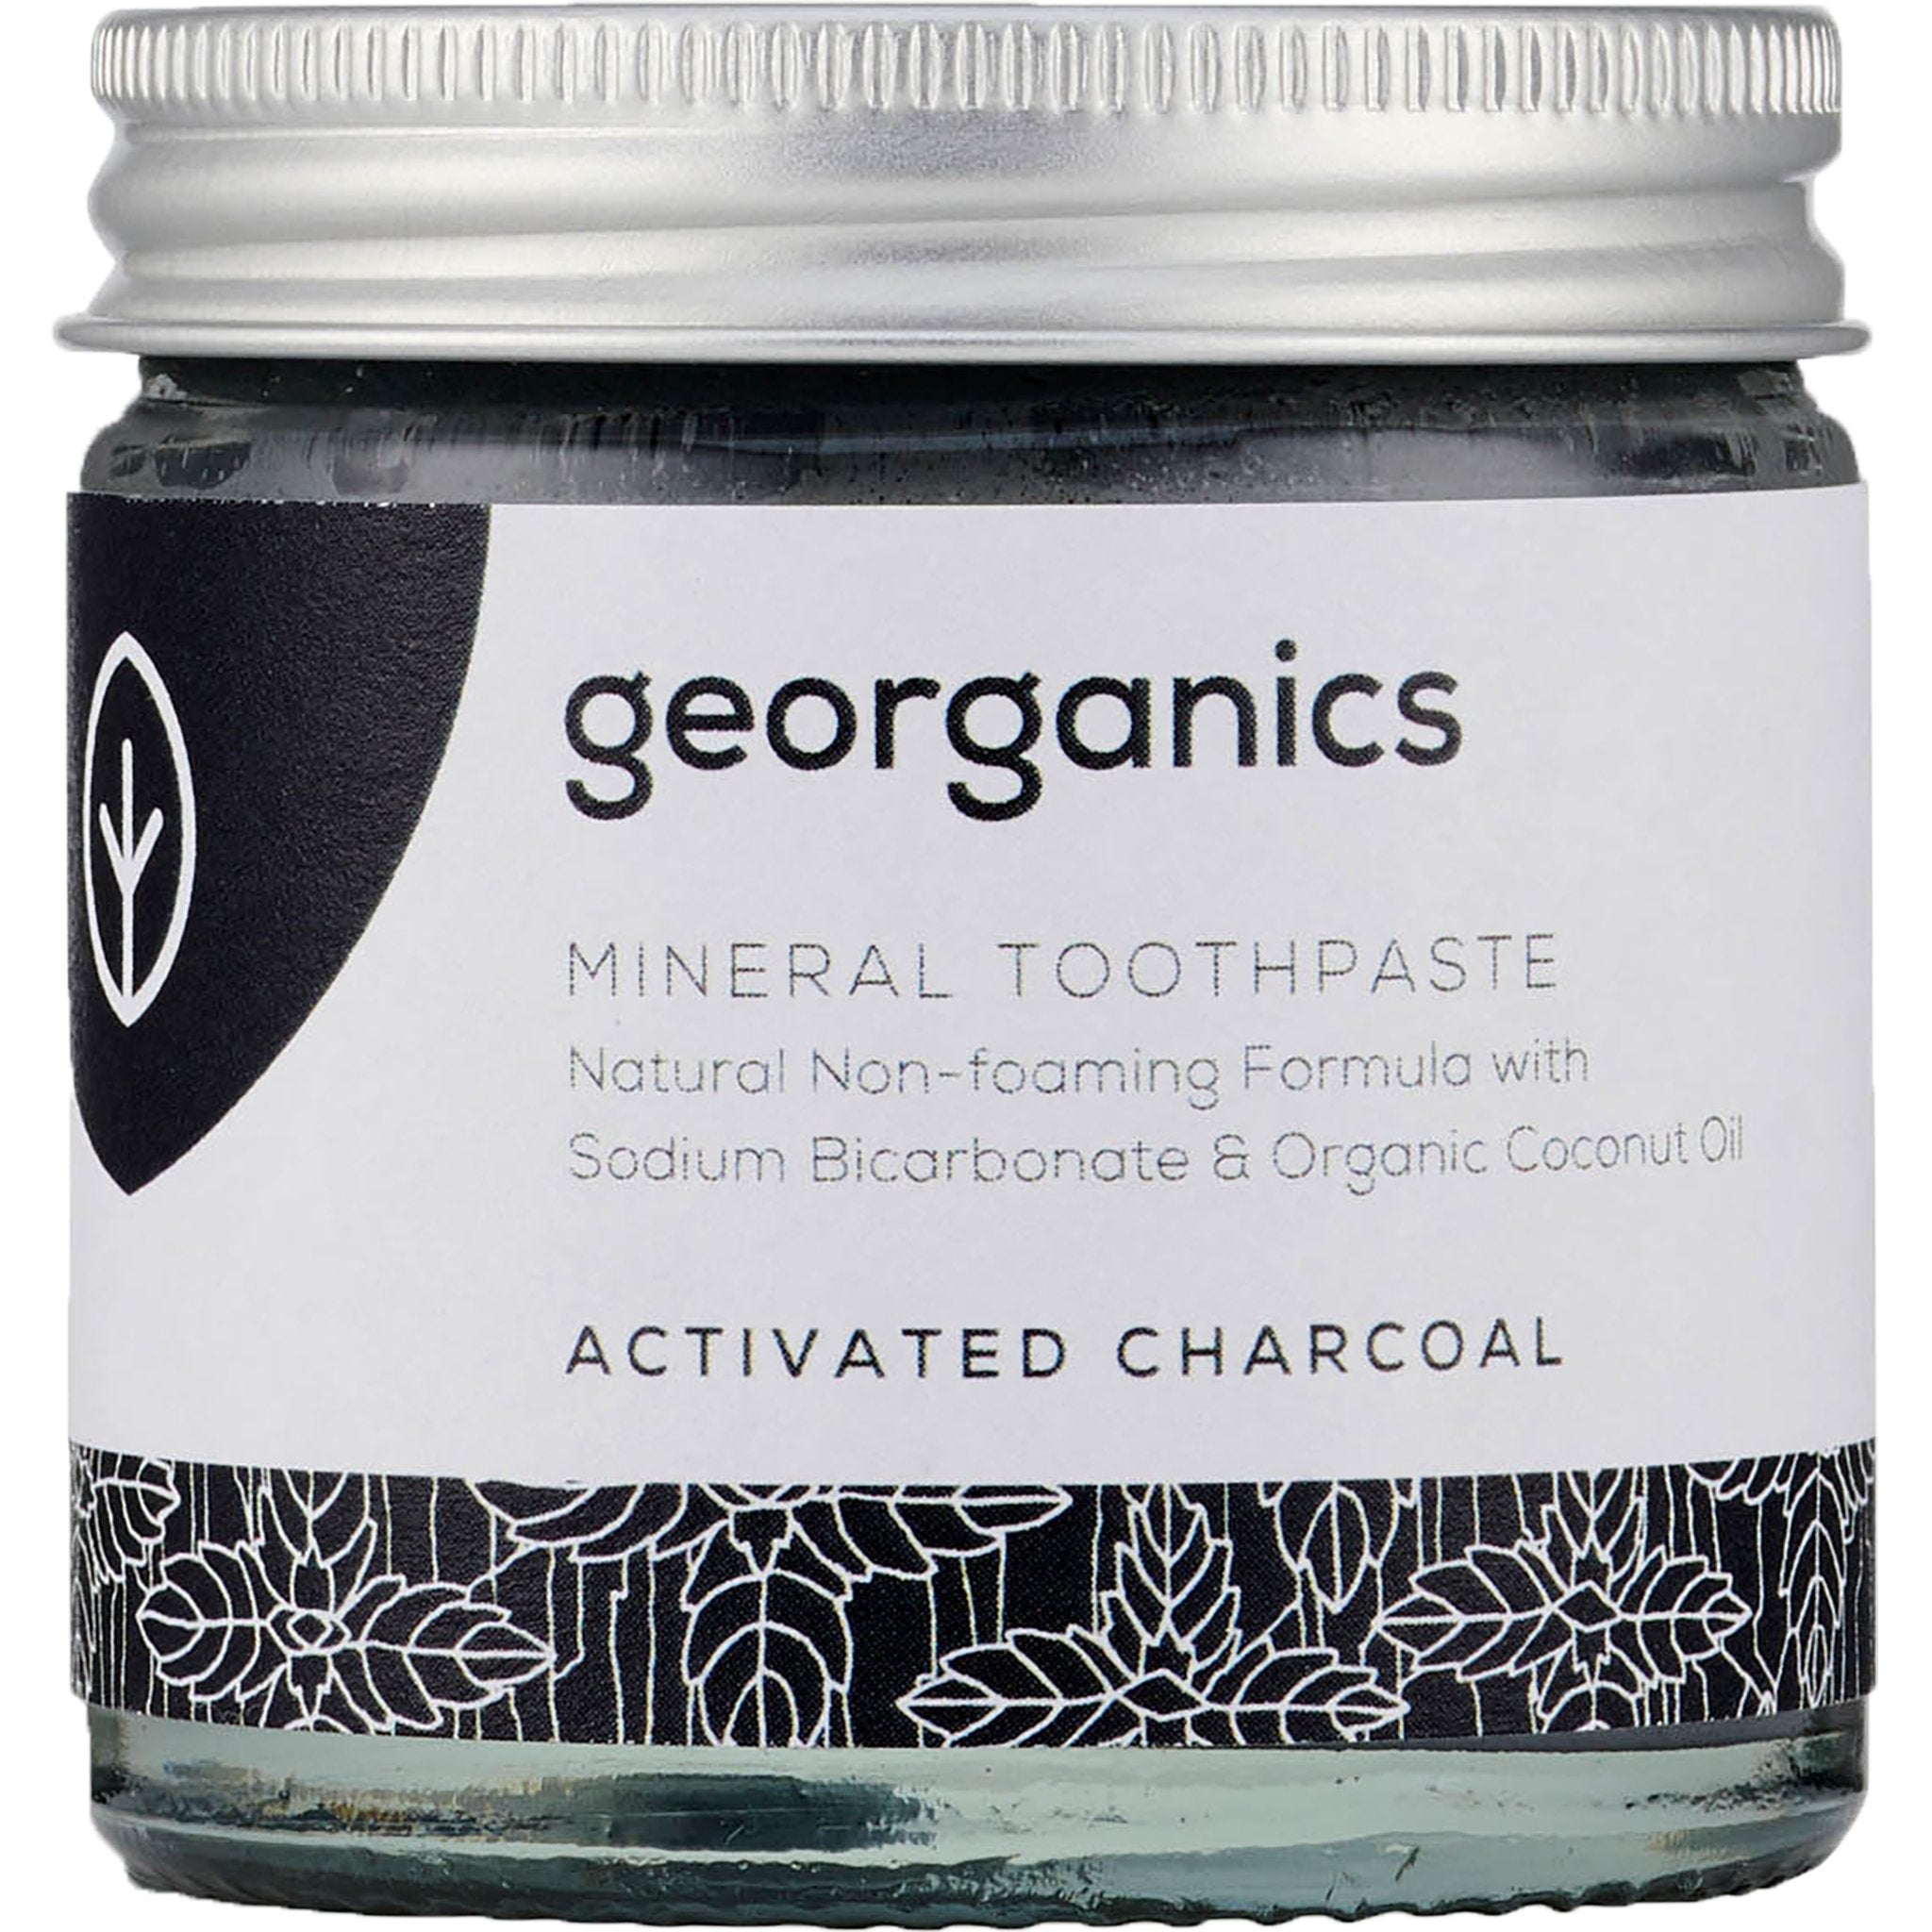 Mineral Toothpaste Activated Charcoal - mypure.co.uk